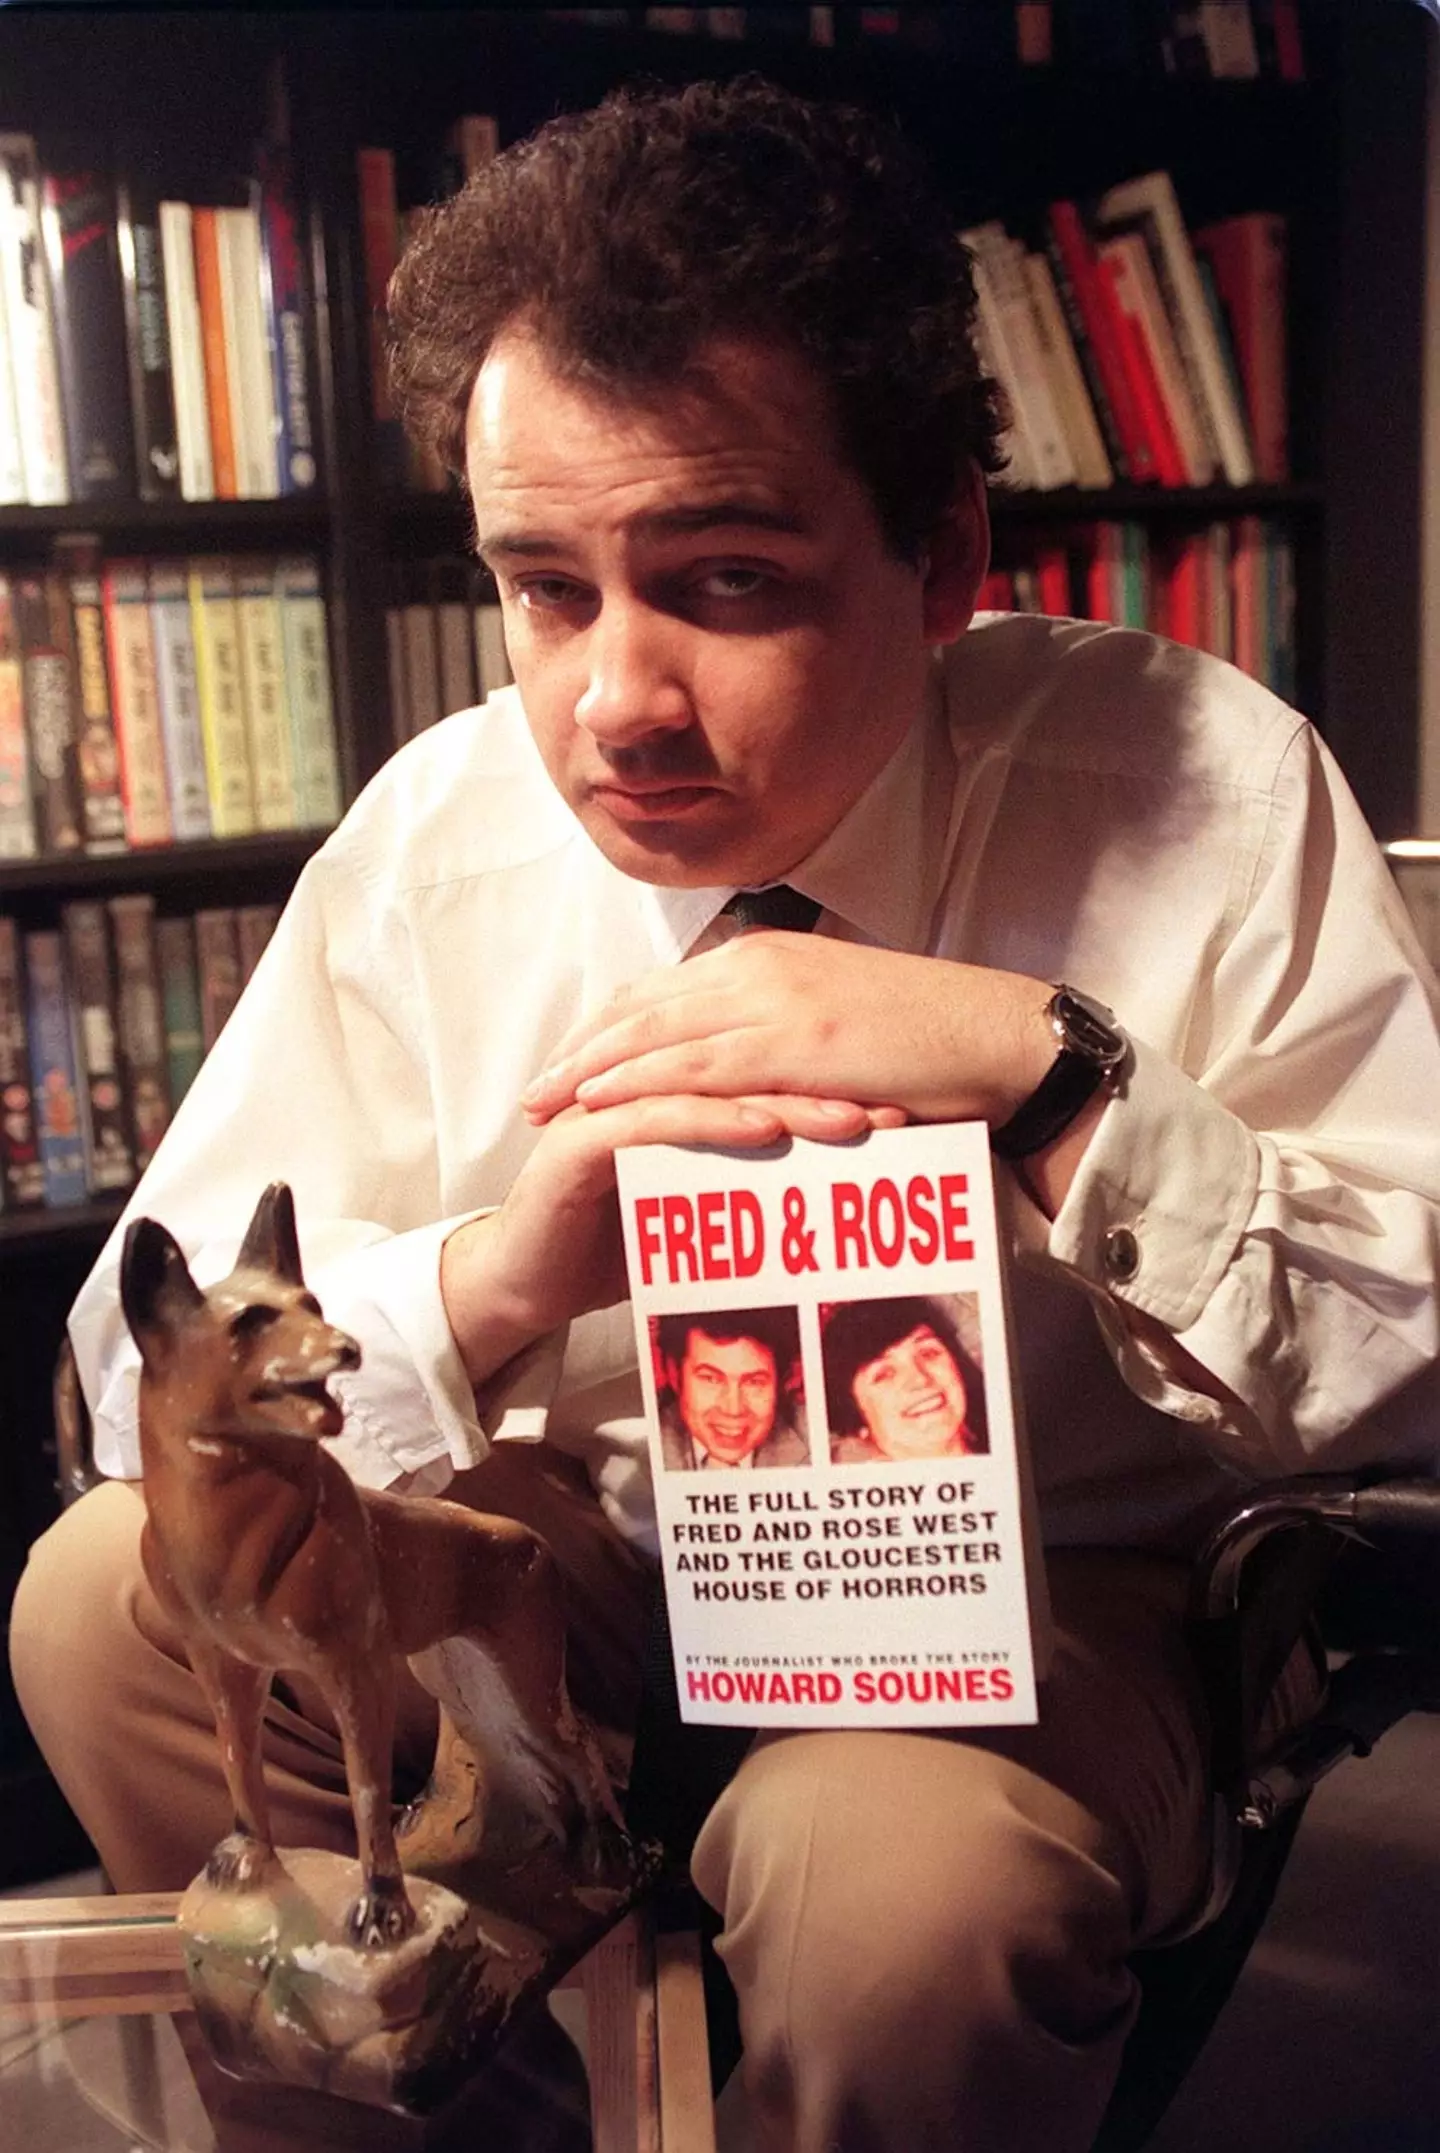 Howard Sounes is an expert on Fred and Rose West and he is involved in the documentary (